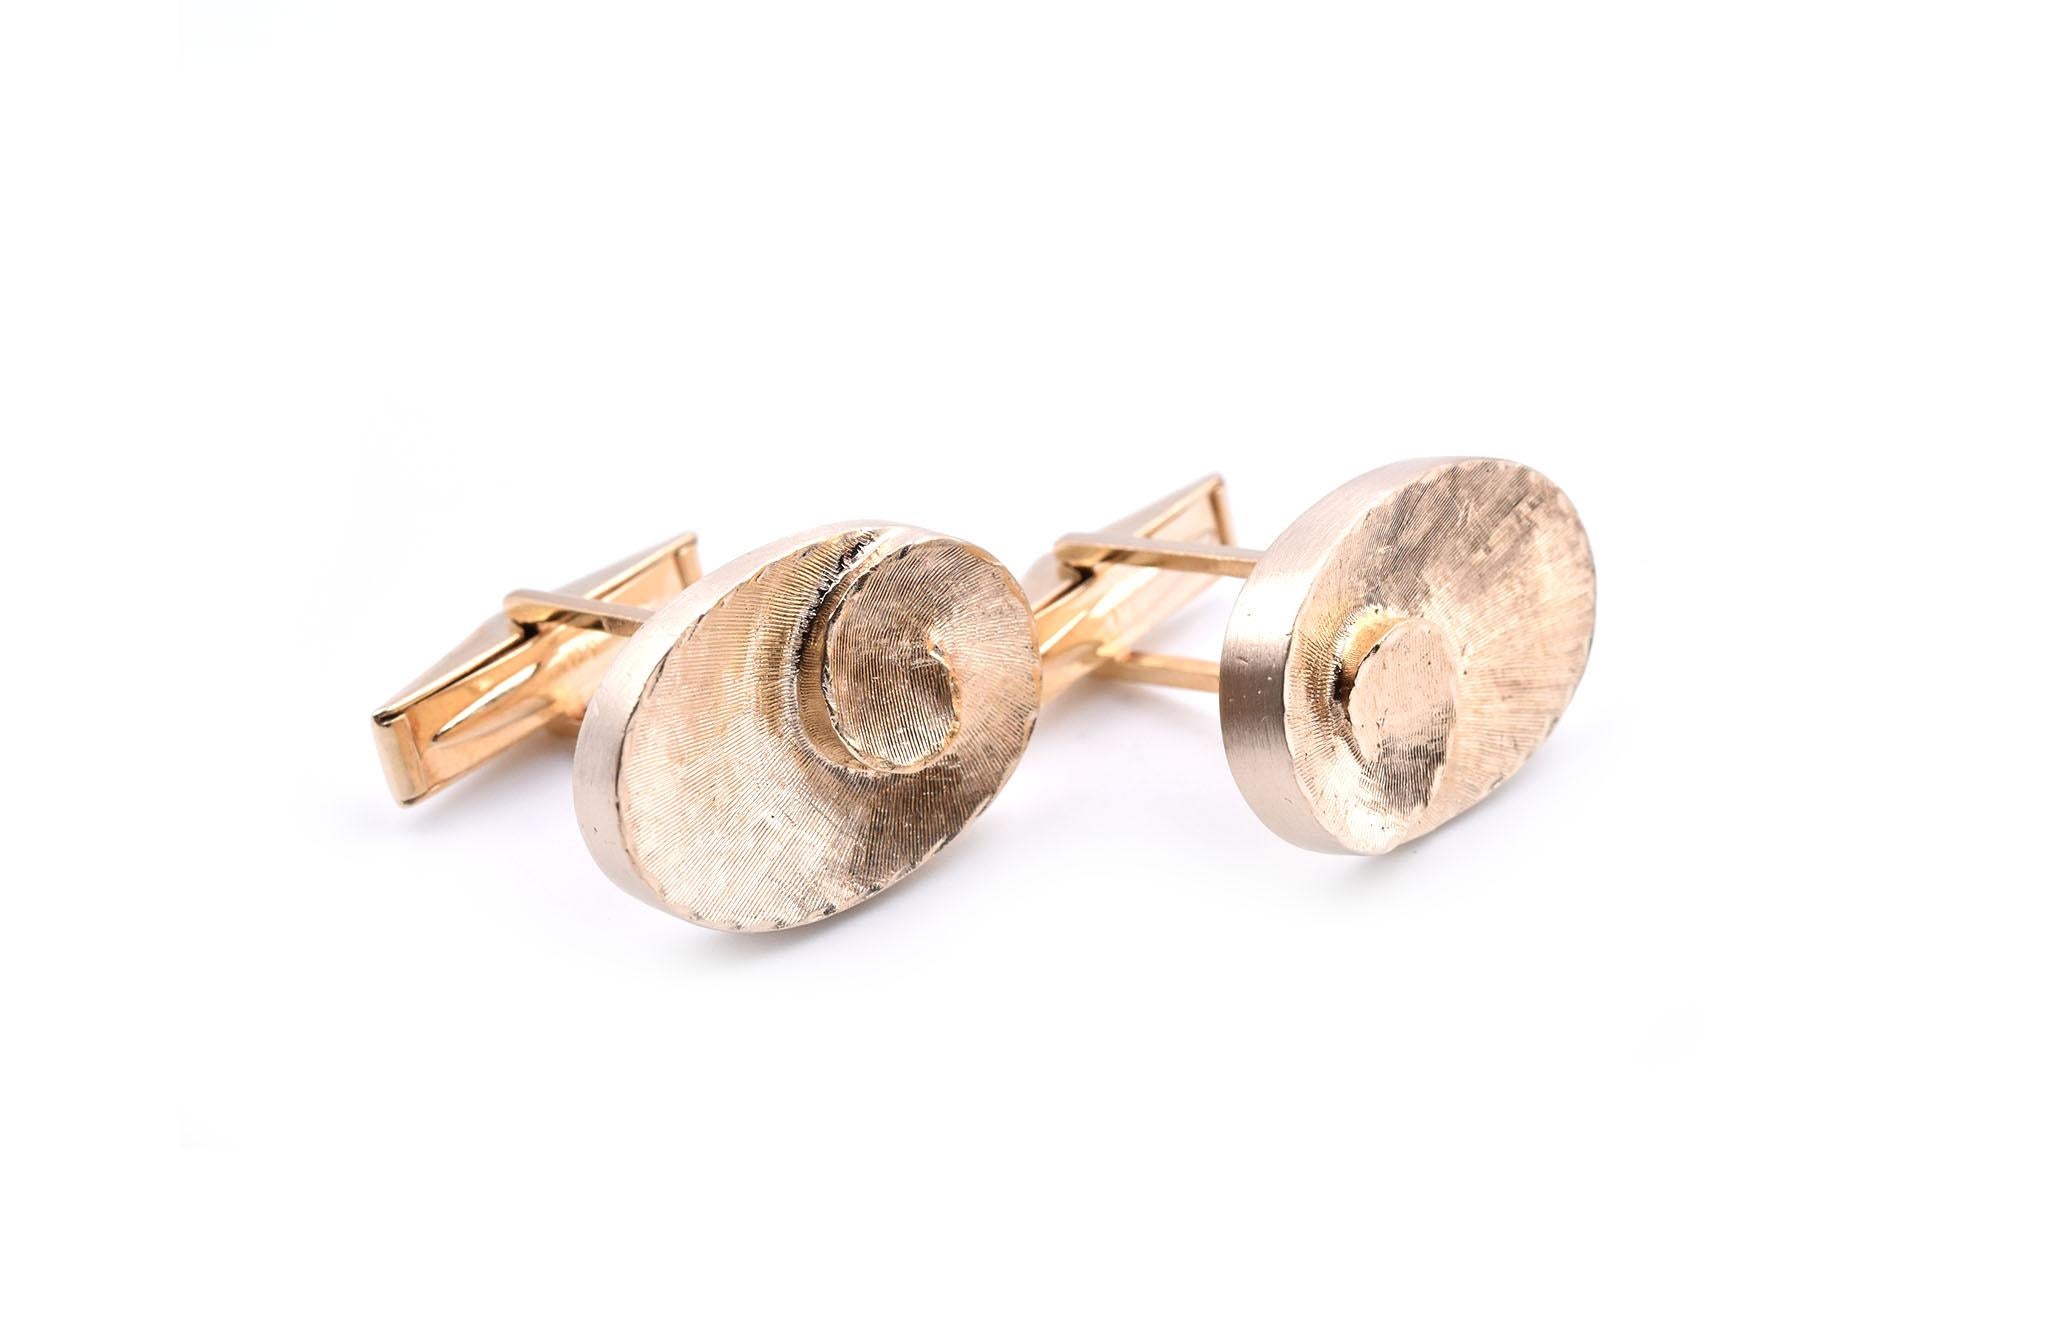 Designer: custom design
Material: 14k yellow gold
Dimensions: cufflinks measure 15.50mm in width and 21.94mm in length
Weight: 15.39 grams
